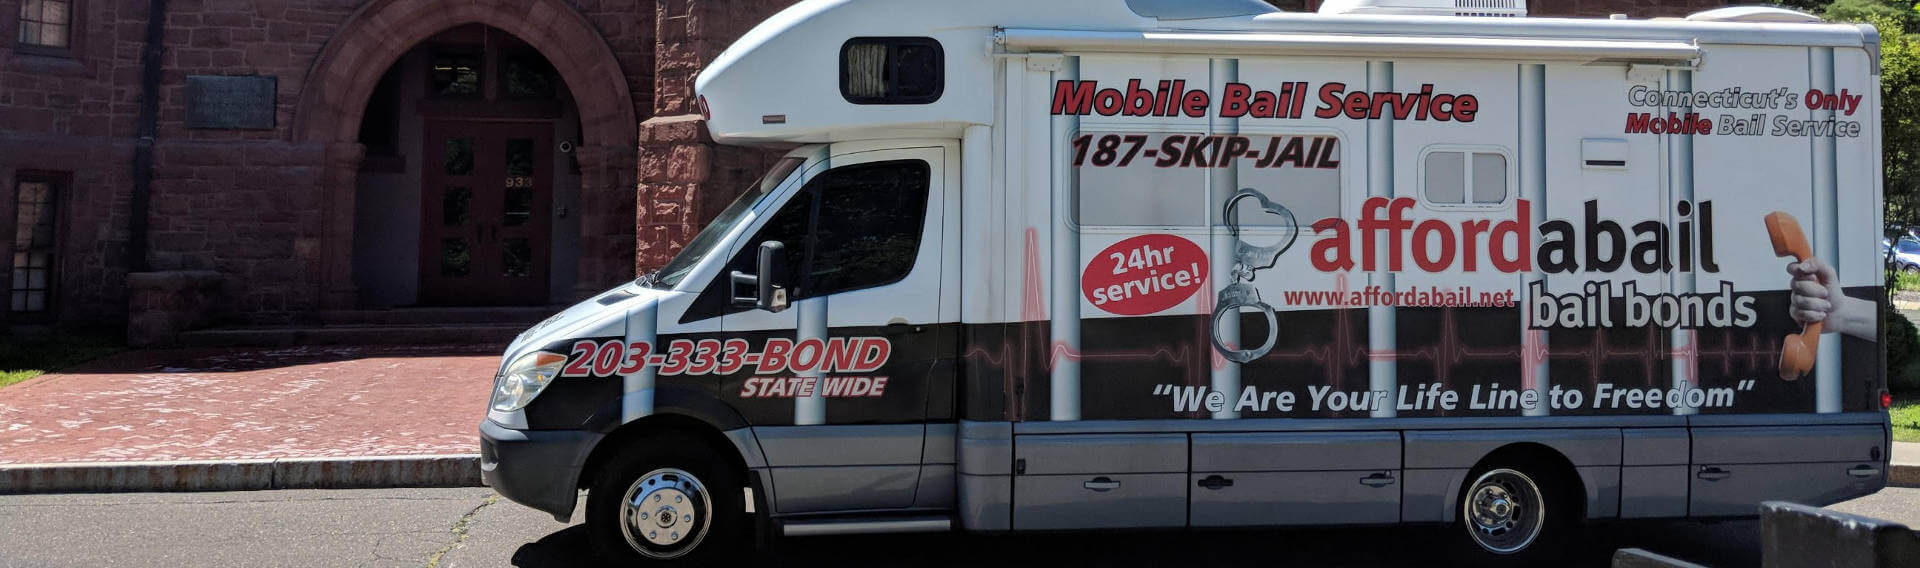 Mobile bail bonds service in Bethany CT